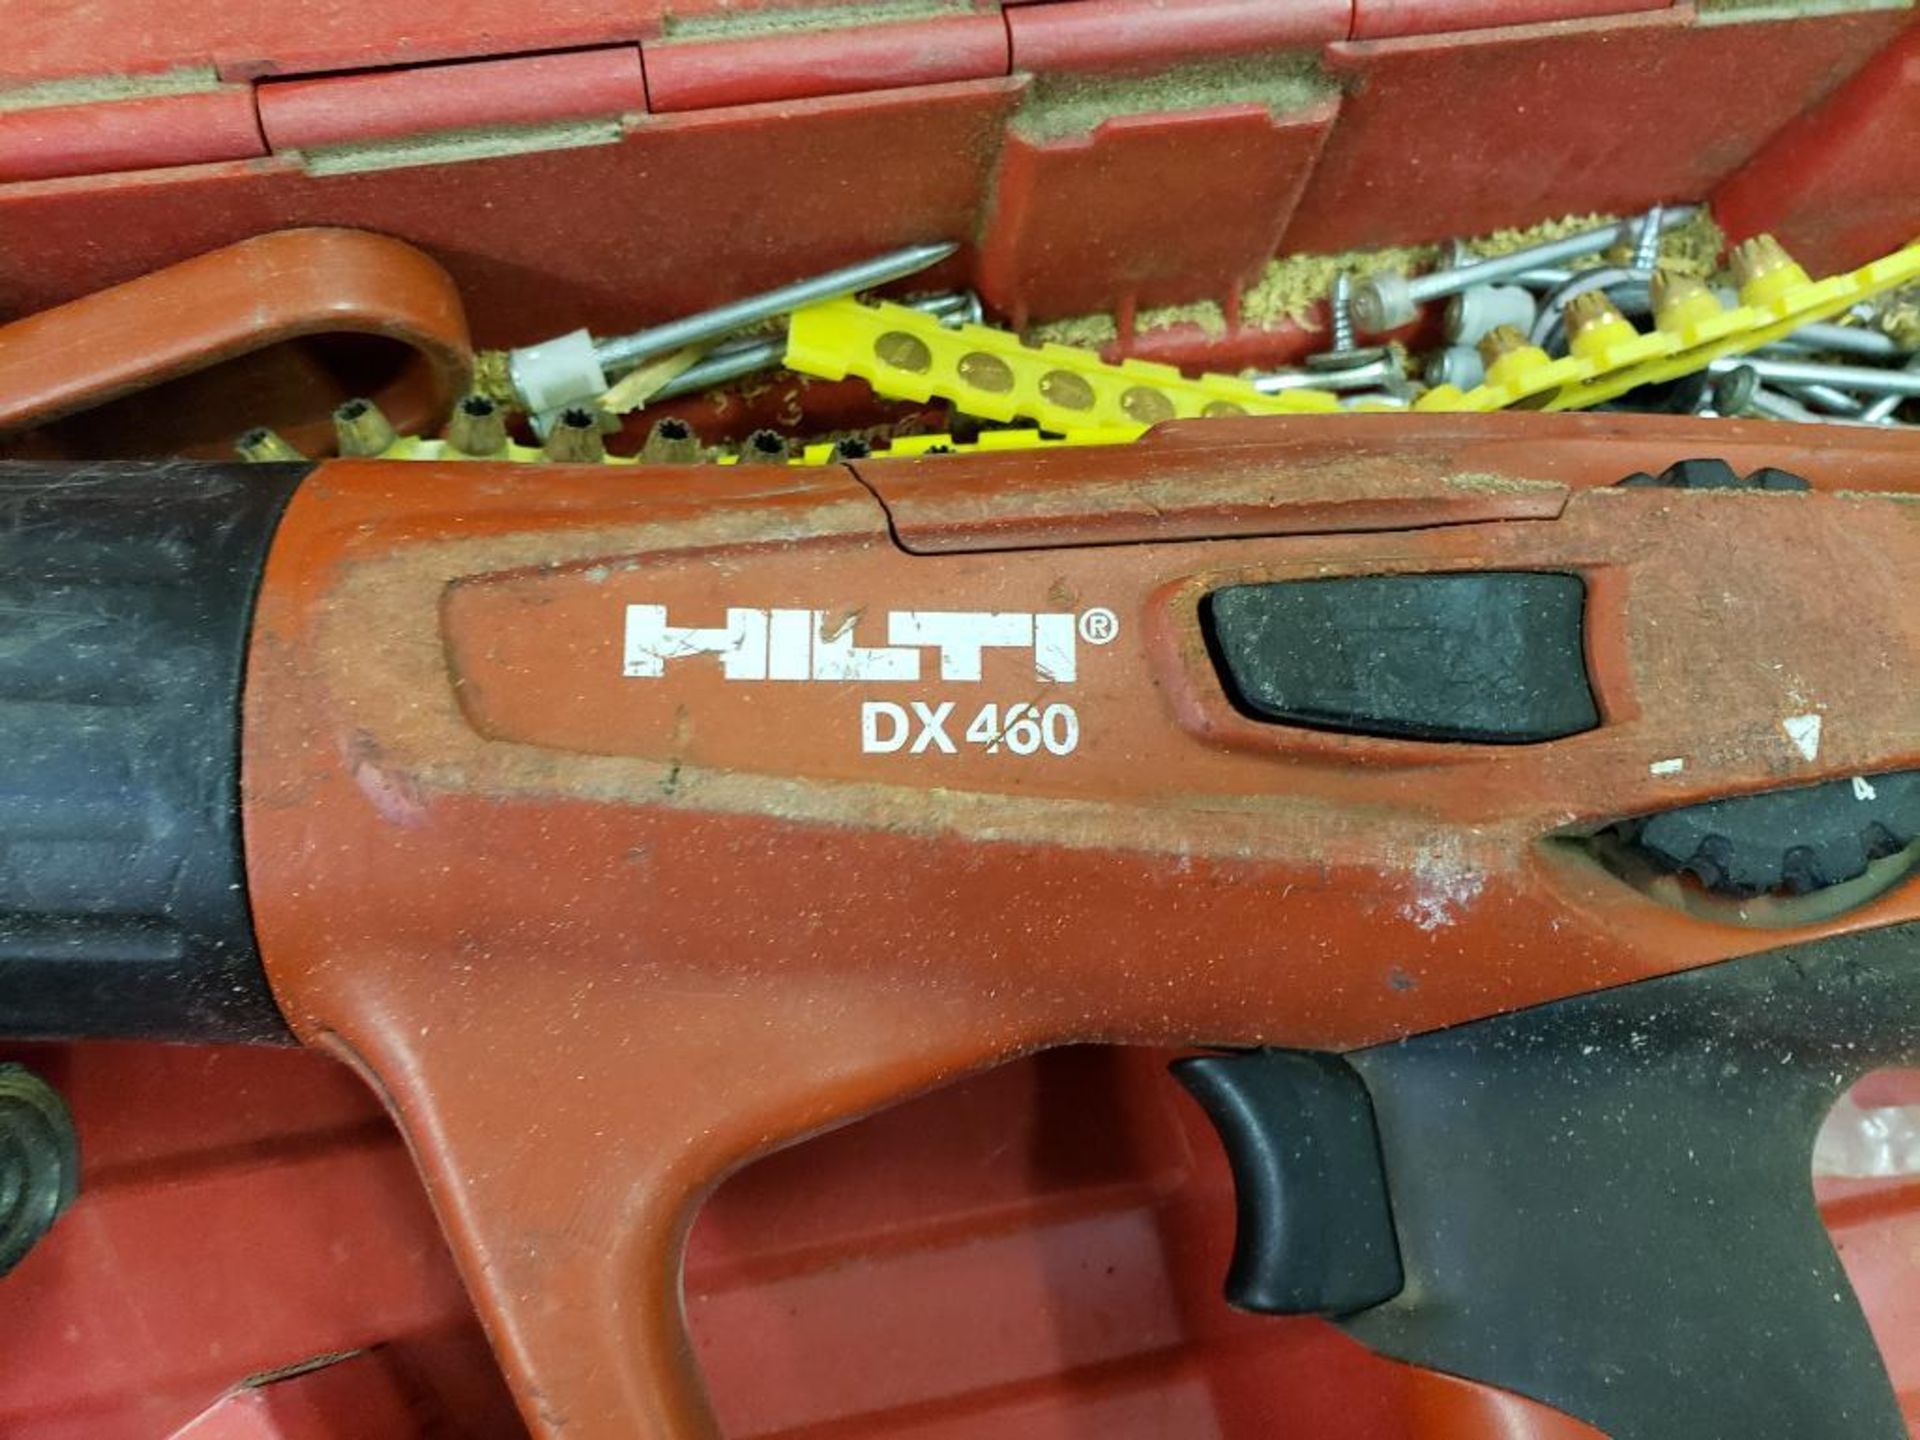 Hilti DX460 powder actuated fastening tool, with MX72 nail magazine. - Image 5 of 8